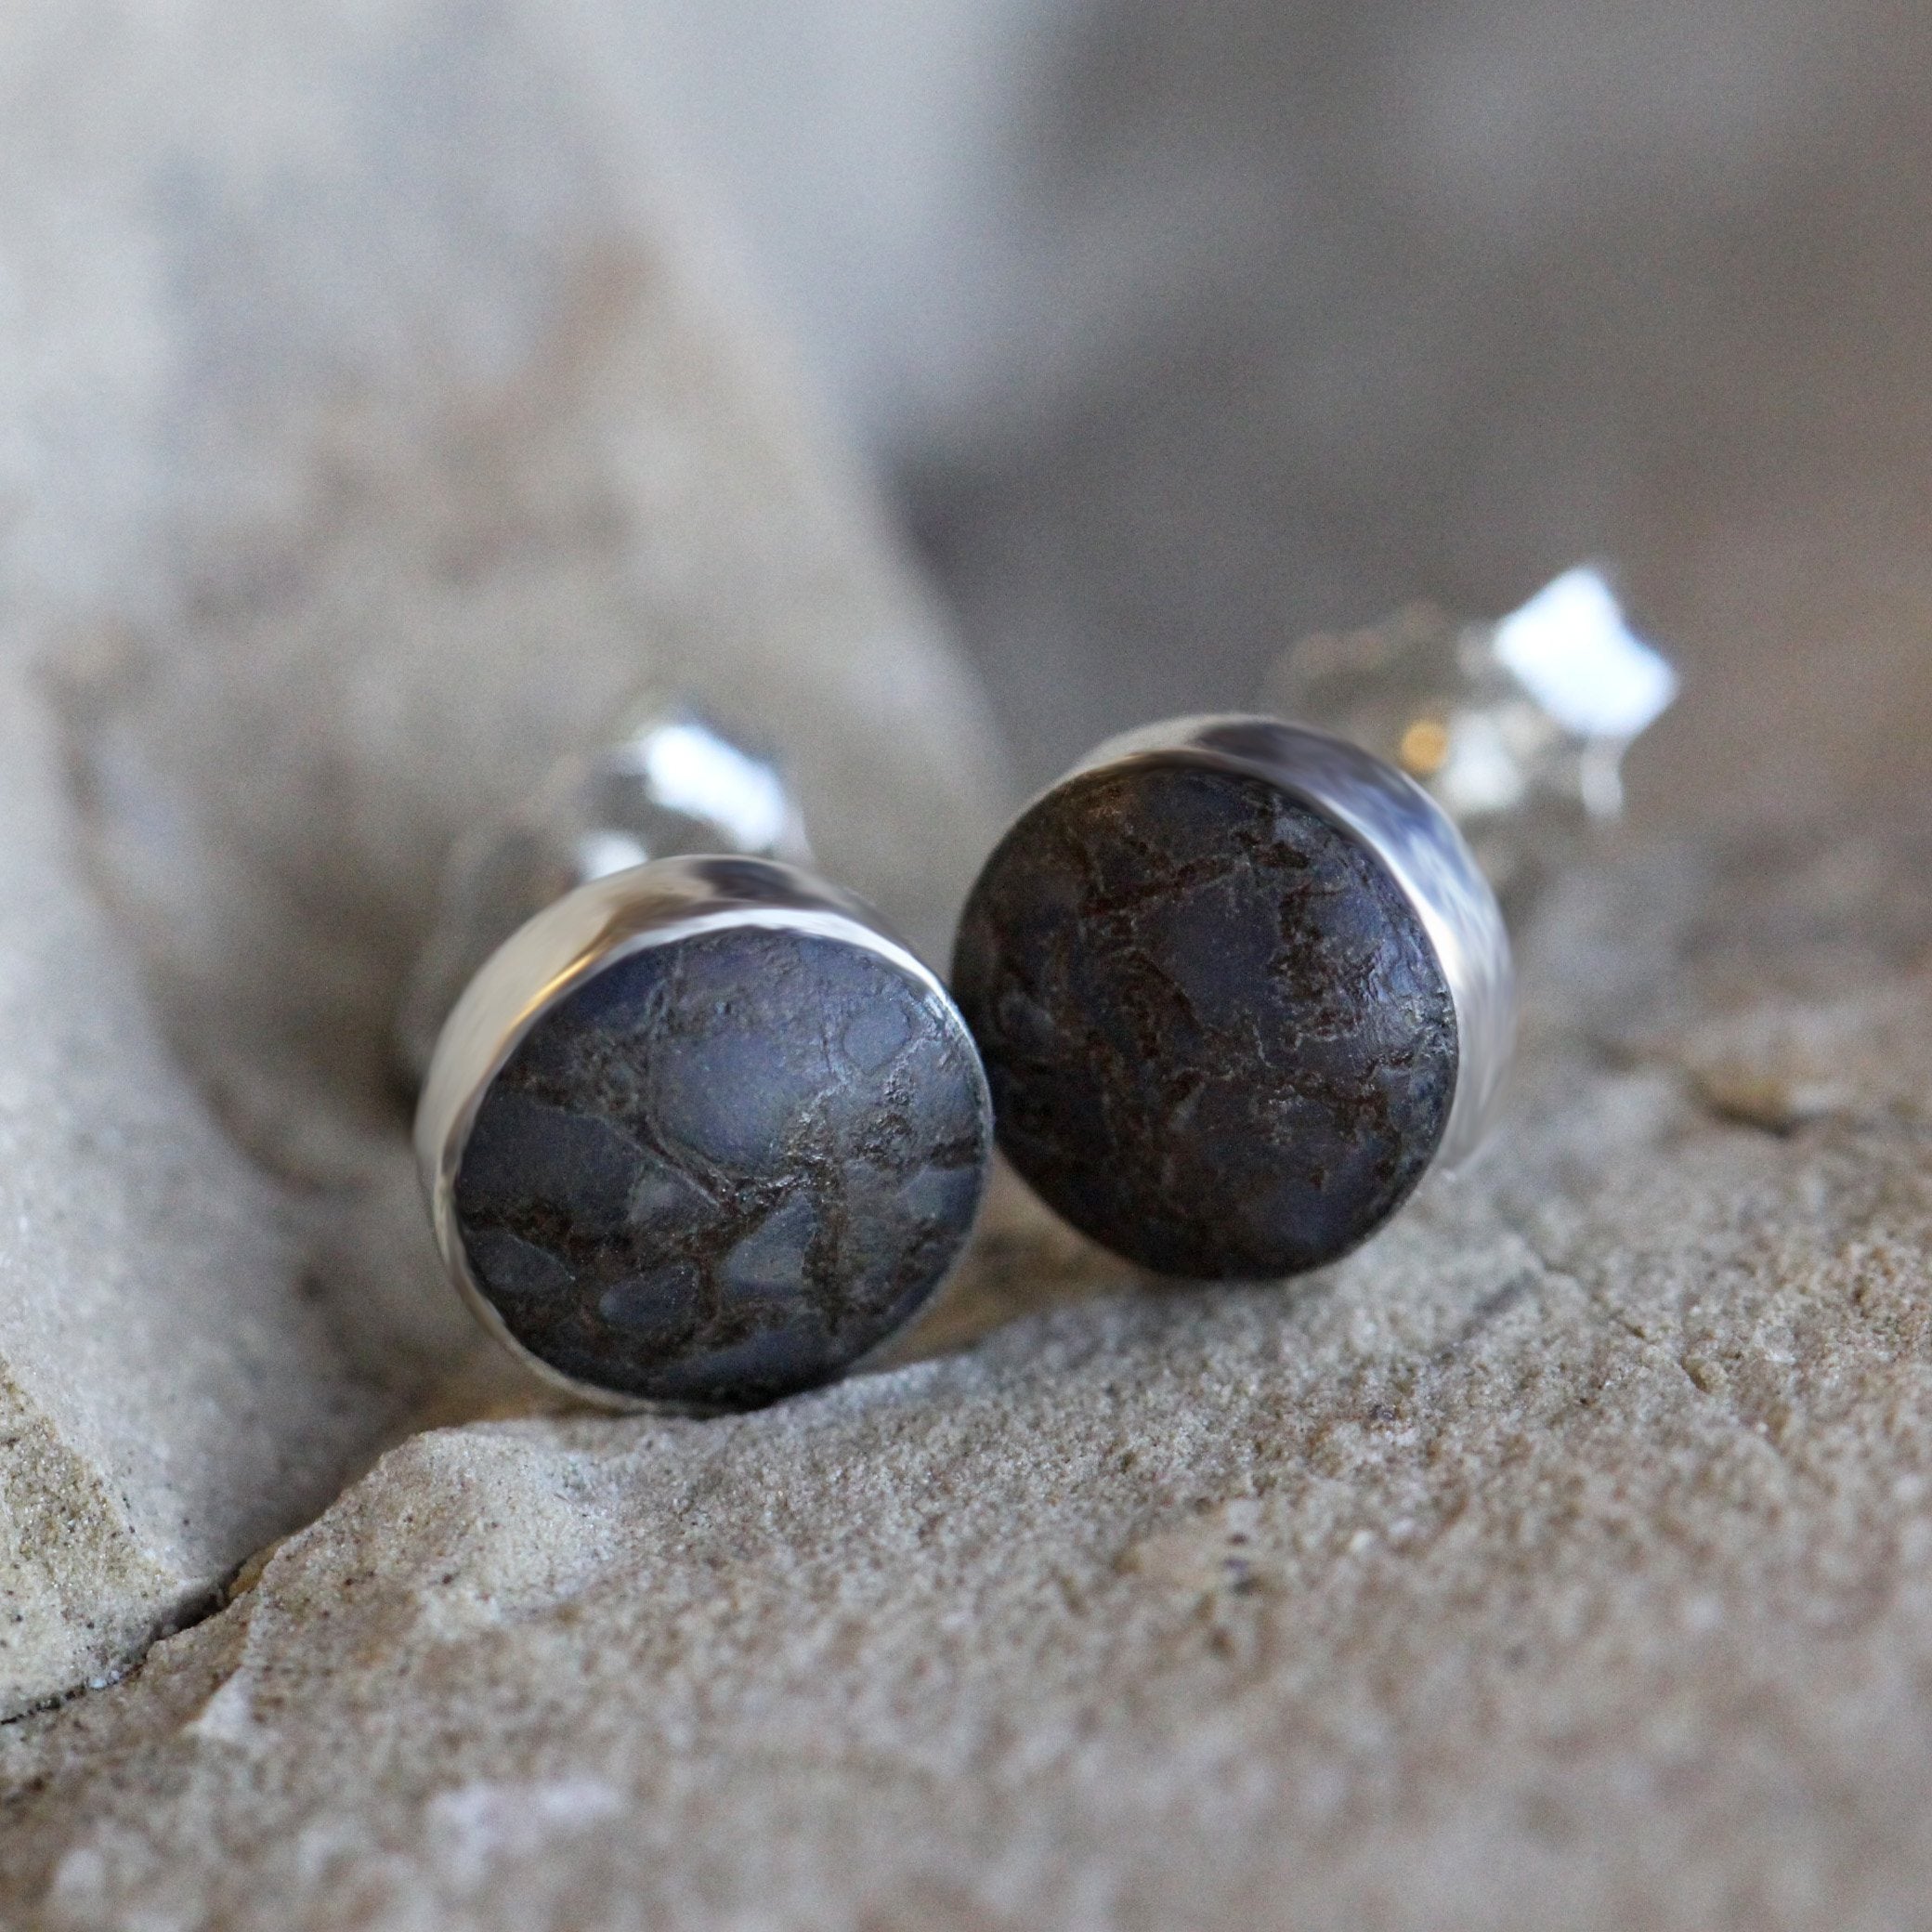 Dinosaur Fossil Tiny Stud Earrings, In Stock-SIG3052 - Jewelry by Johan